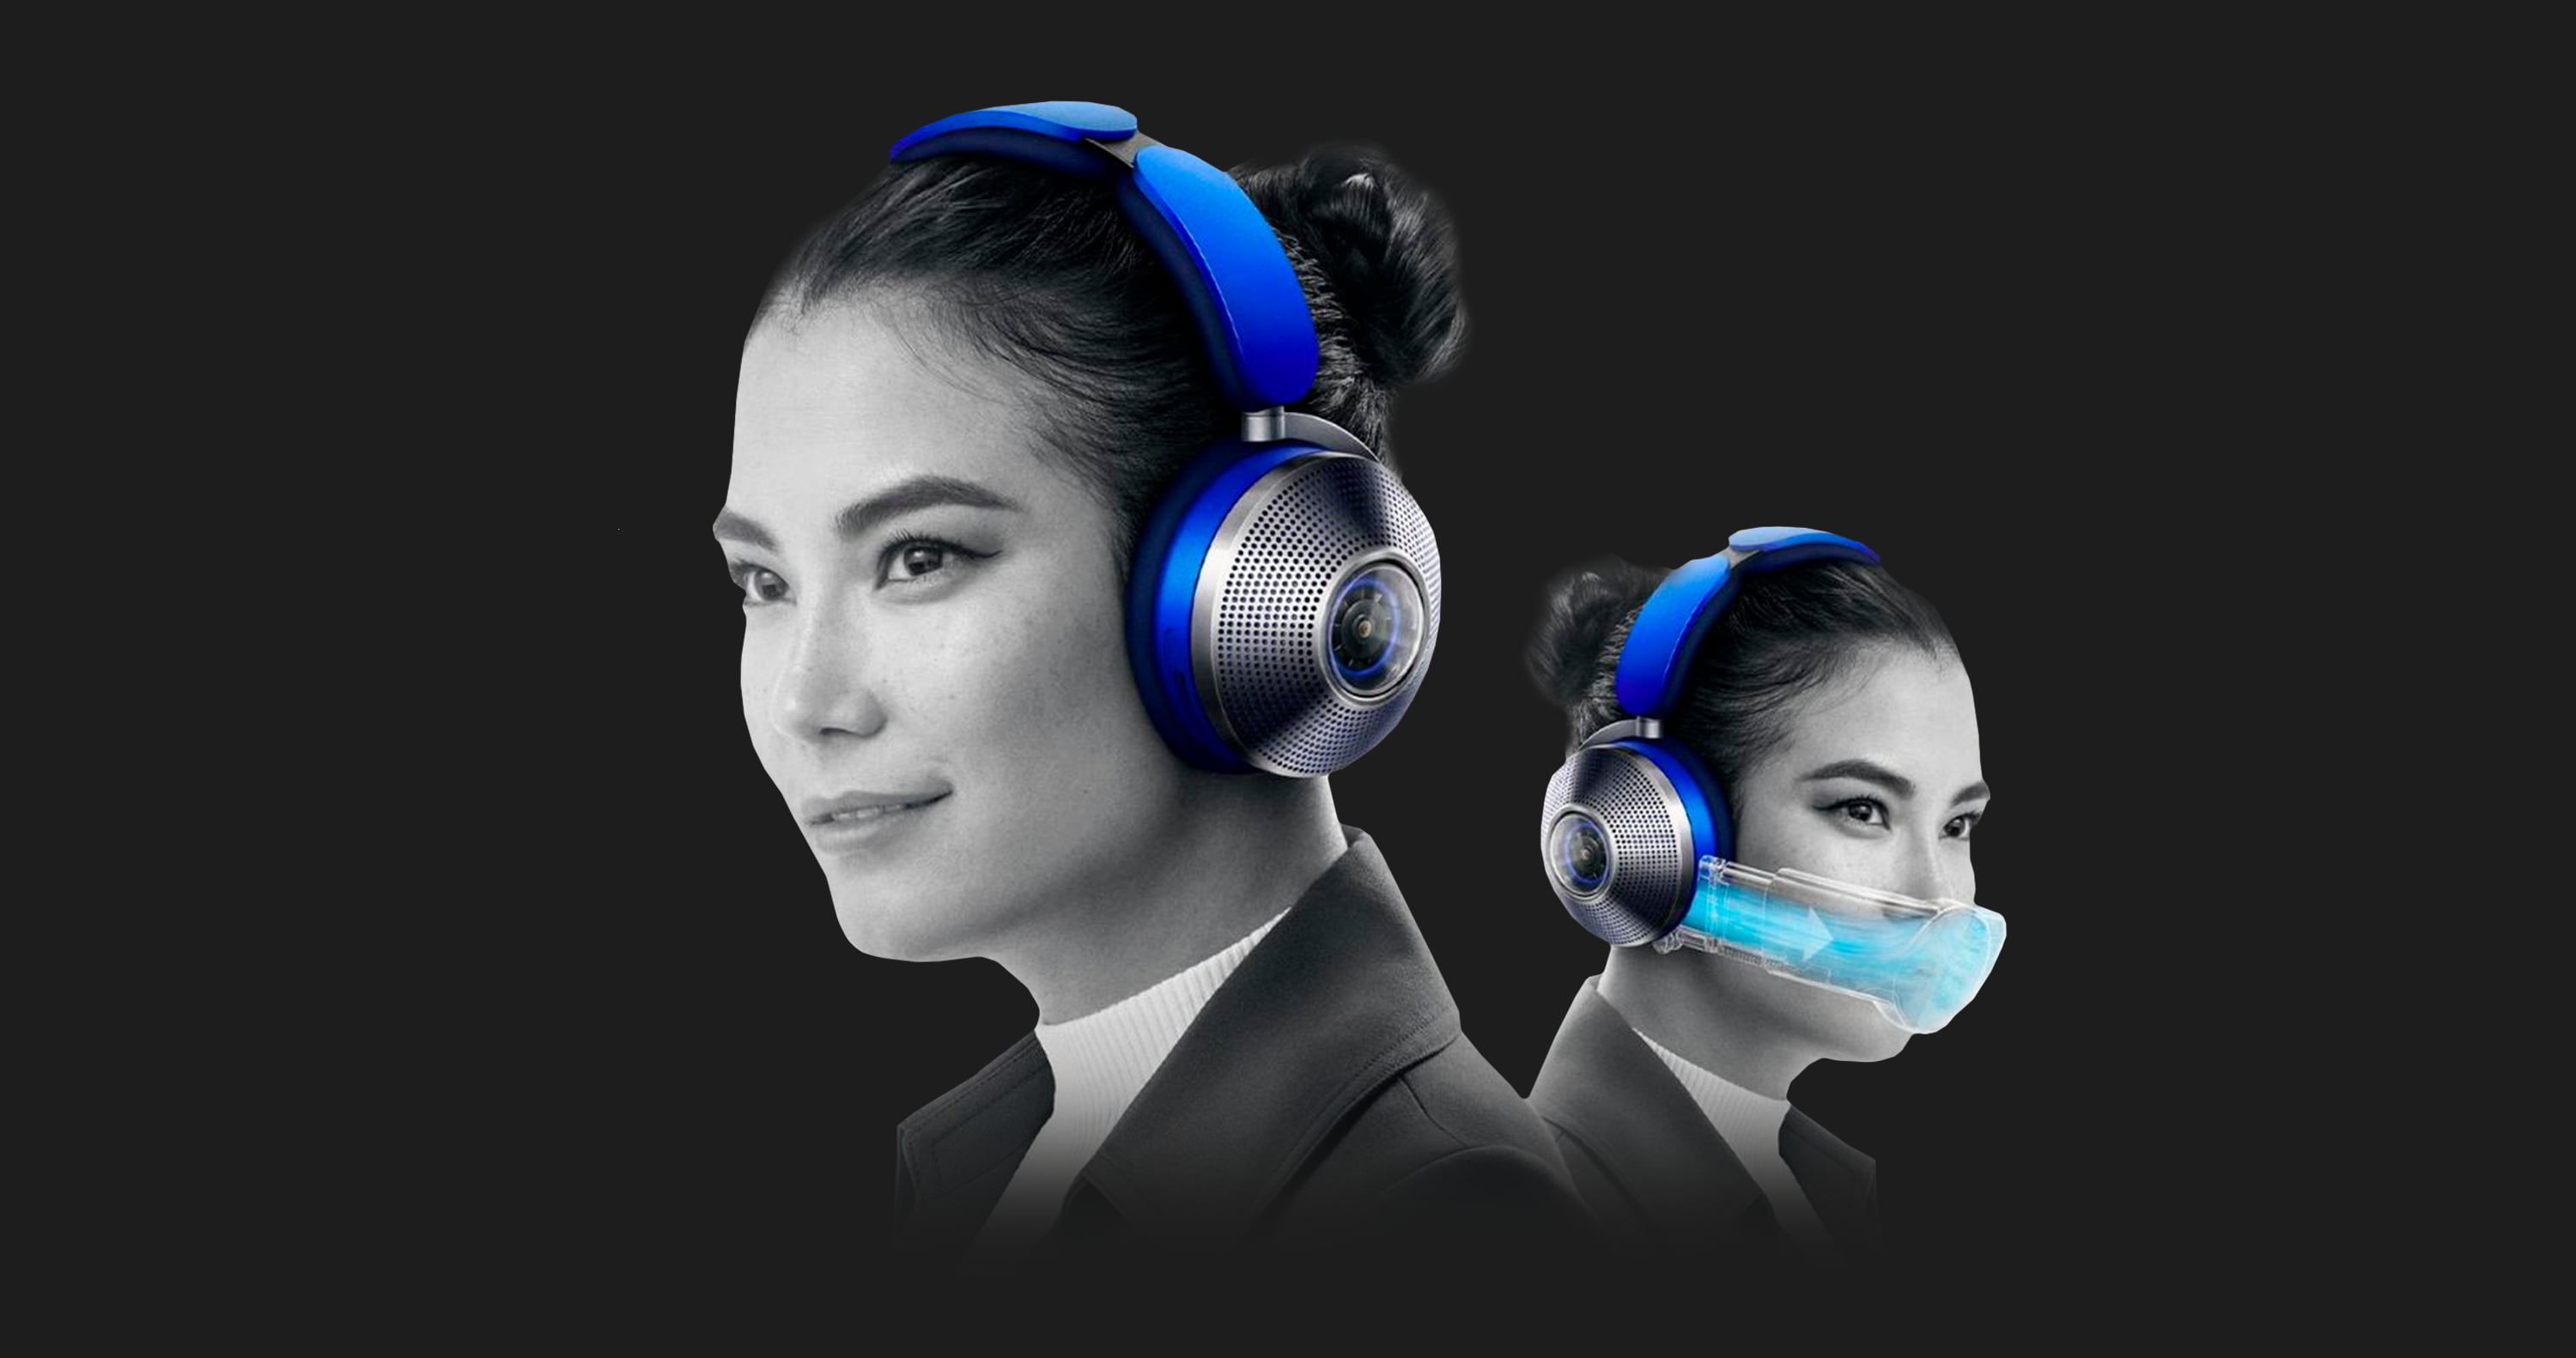 Навушники Dyson Zone headphones with air purification (Ultra Blue/Prussian Blue)